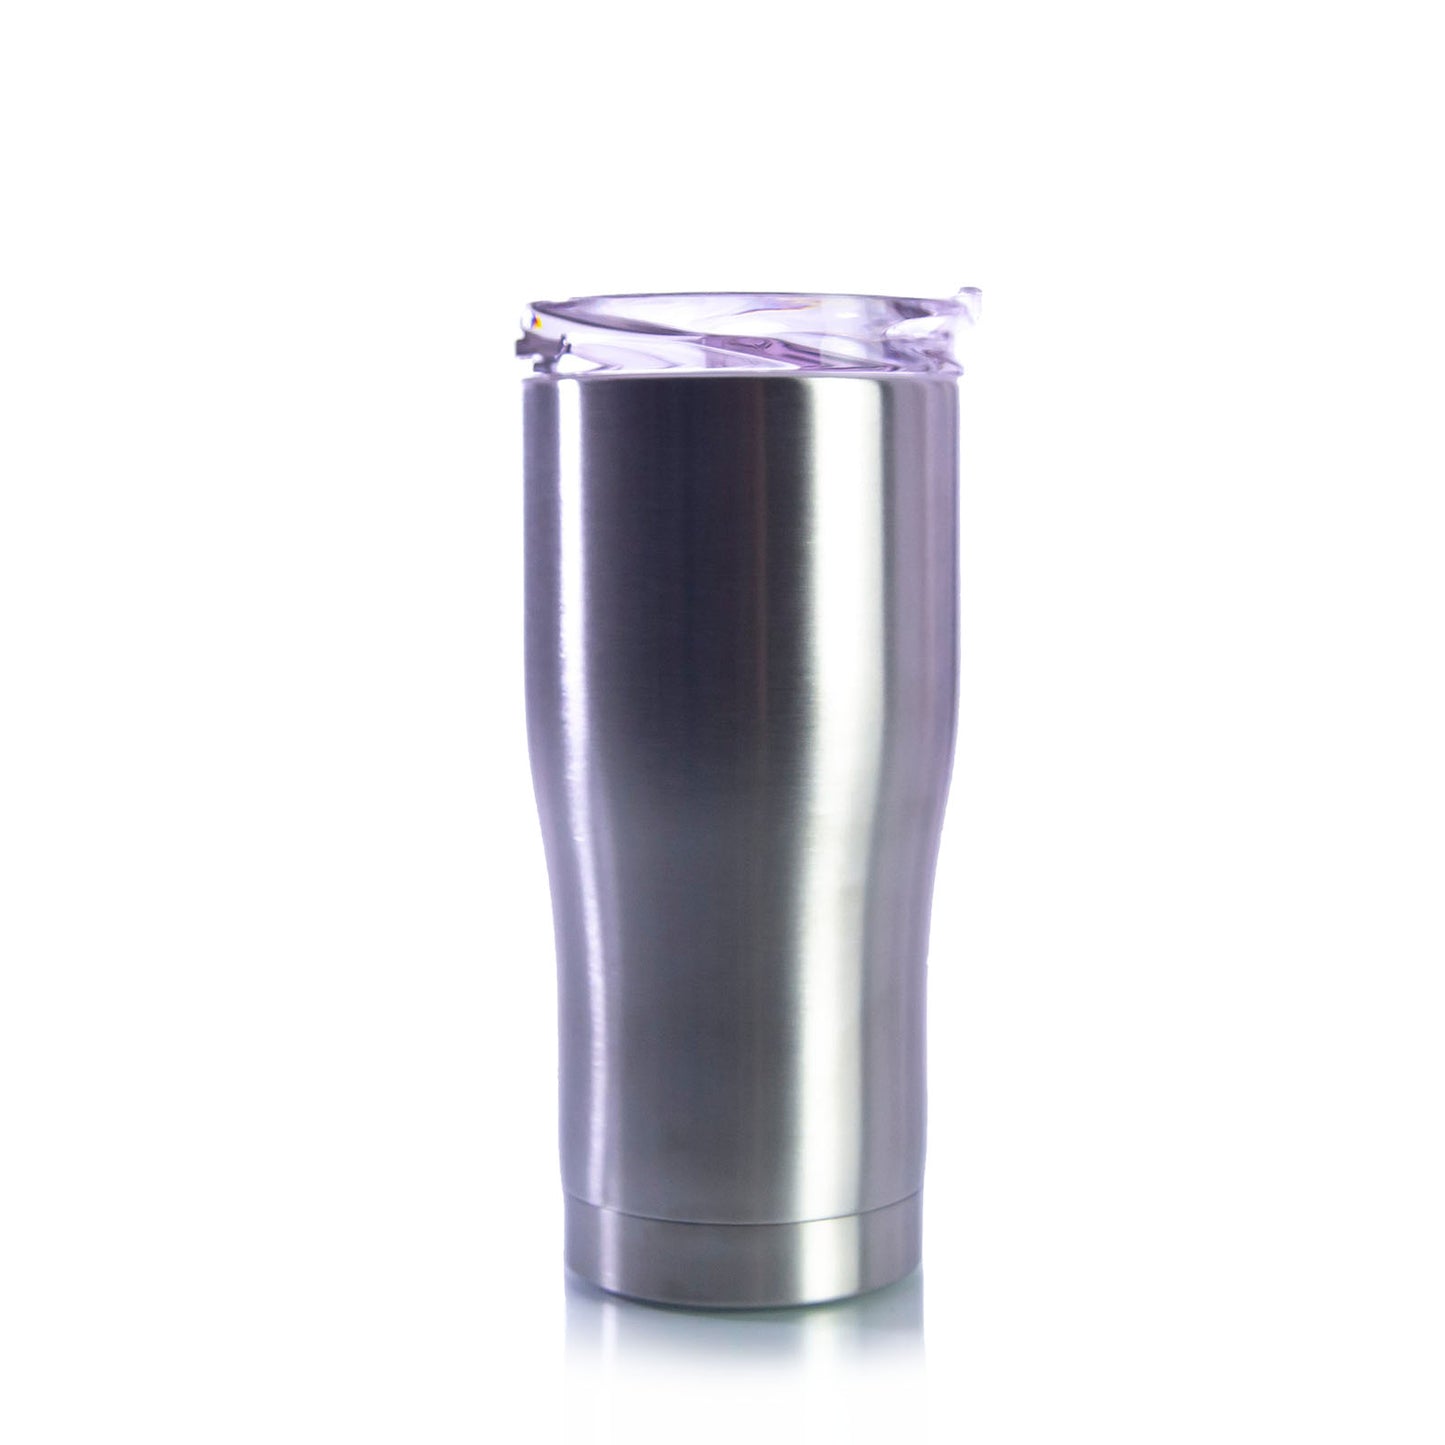 odern slim tumbler that is leak proof! All items can be shopped at the, Tumbler